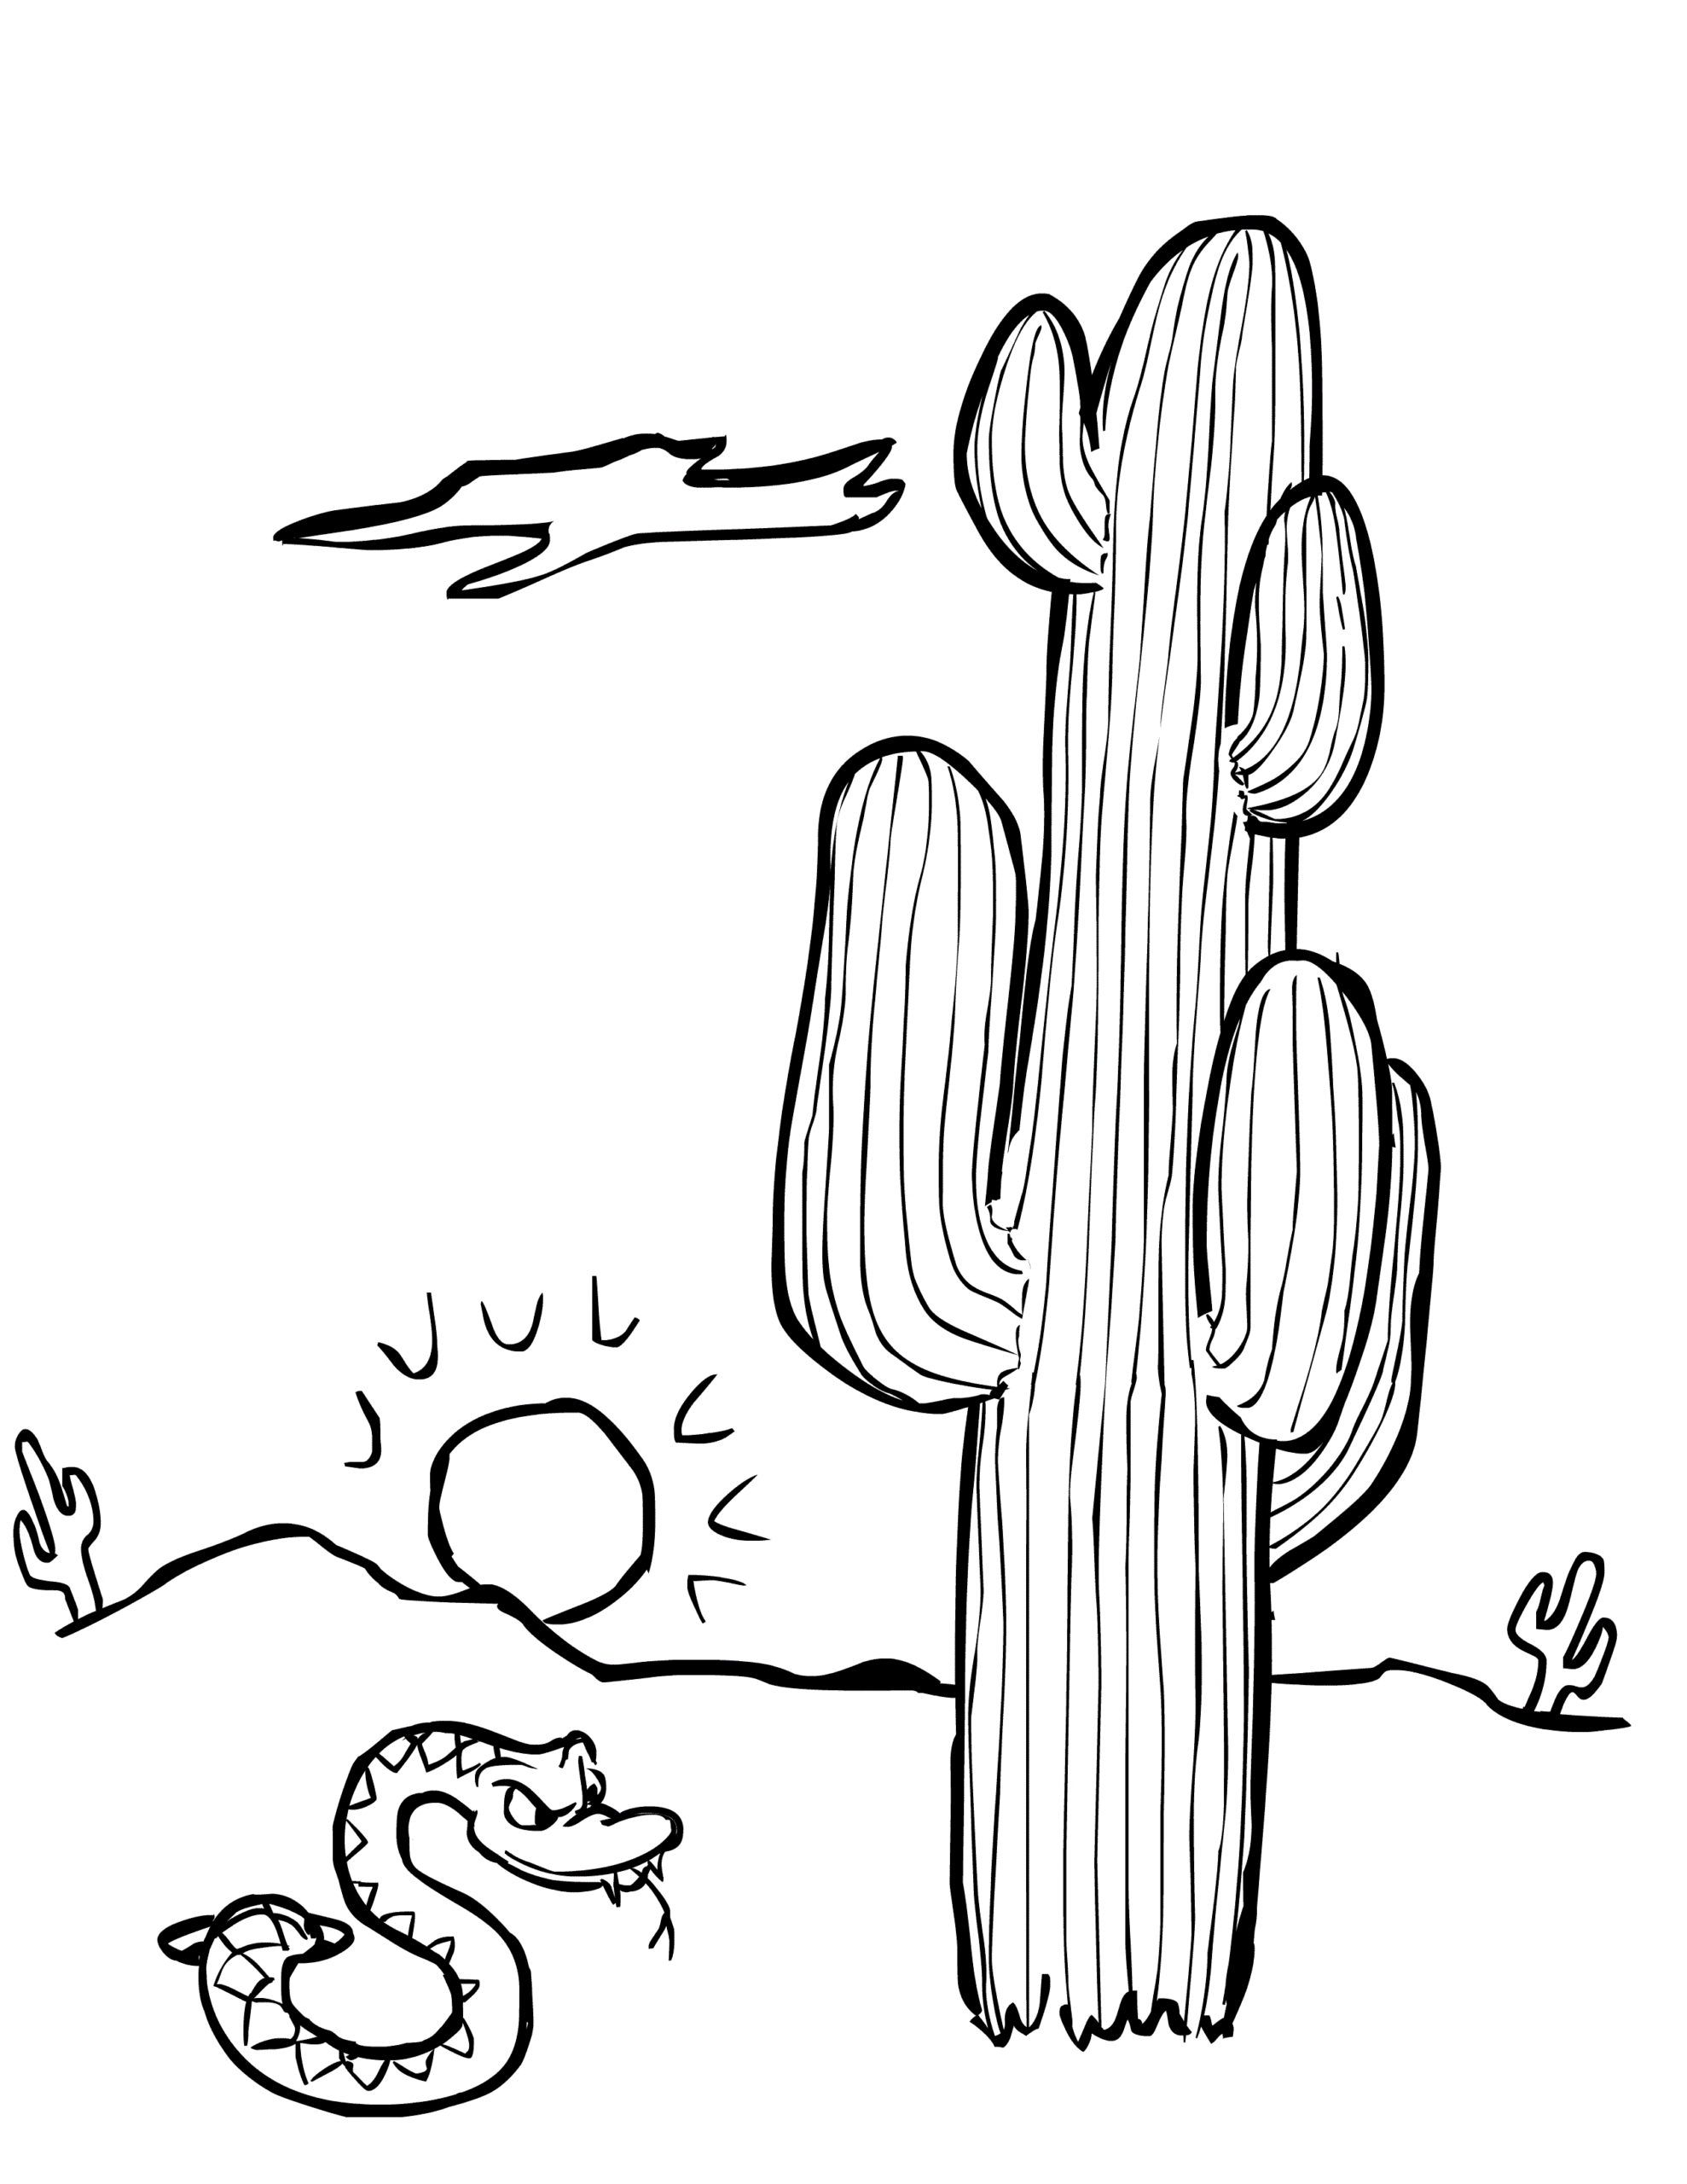 Cactus Coloring Pages Flowers Nature Free Cactus Printable 2021 048 Coloring4free